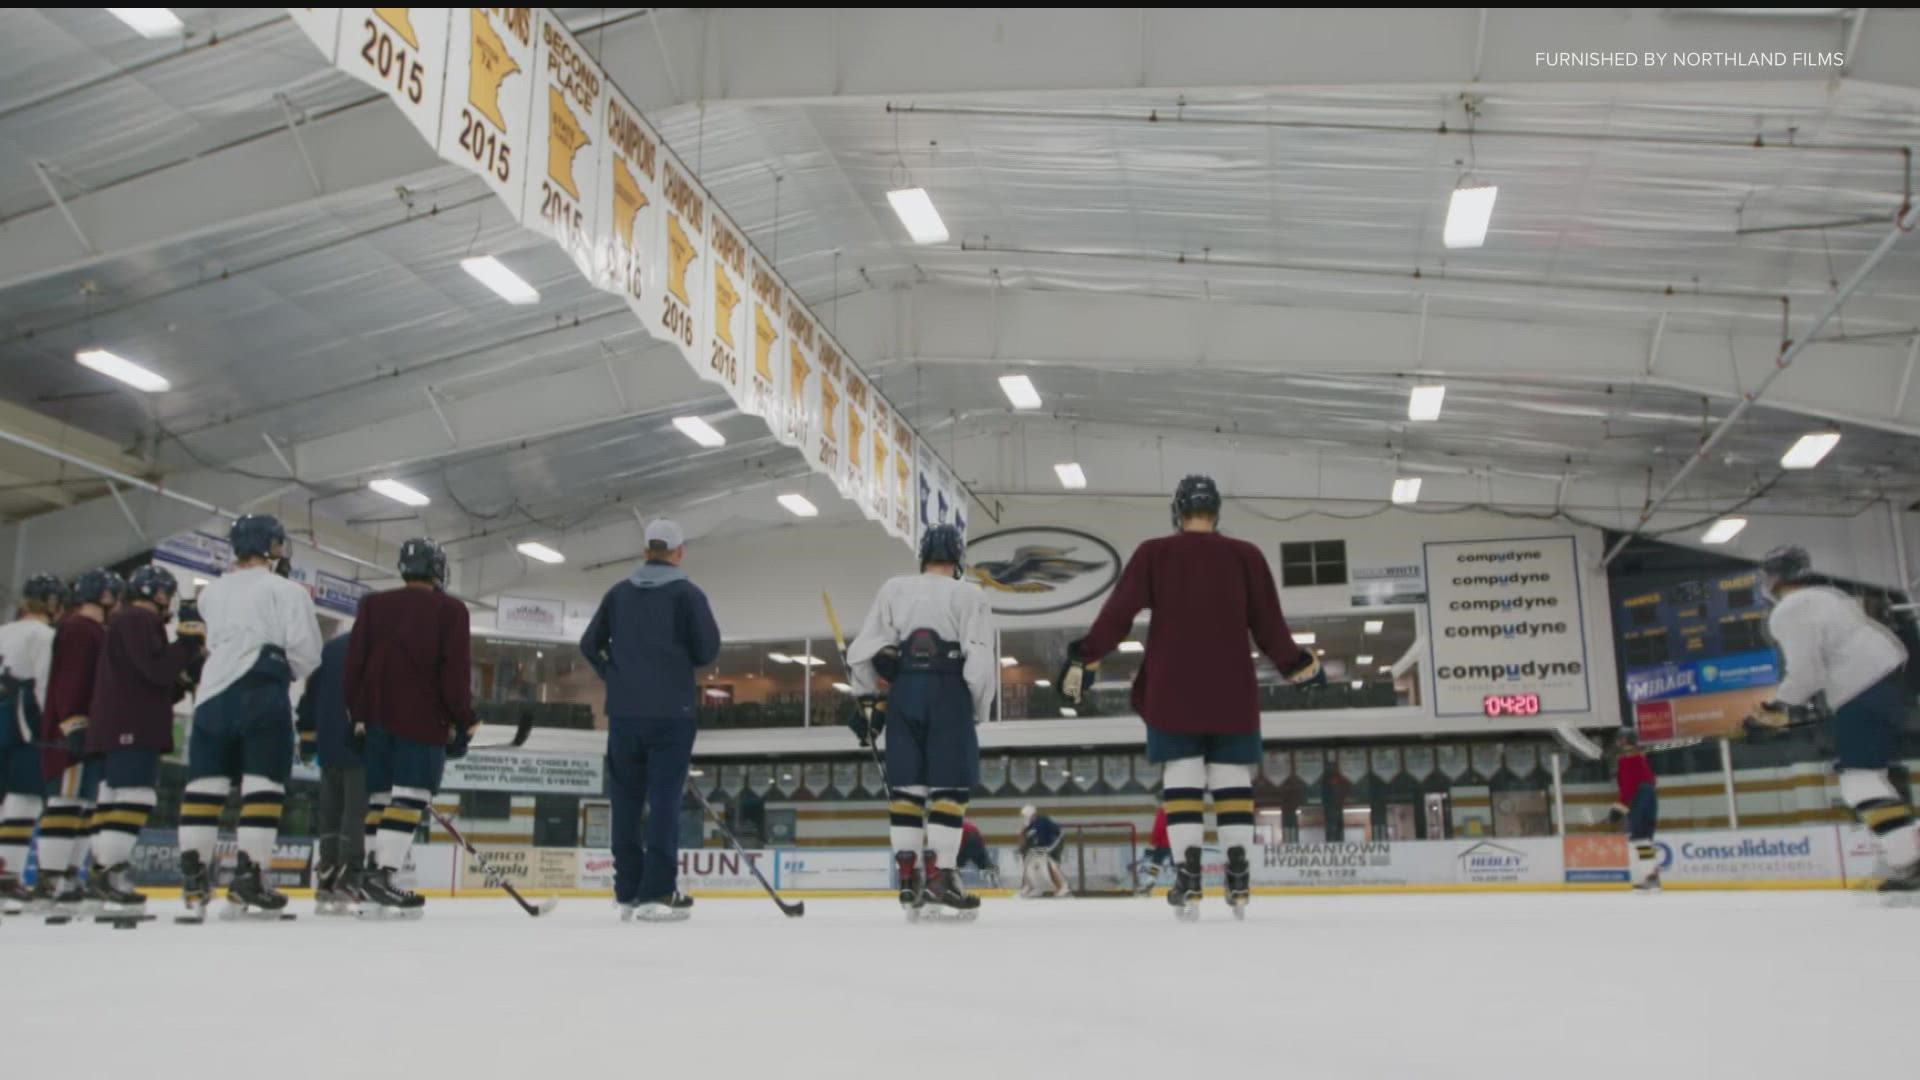 The film chronicles the players of two northern Minnesota teams through ups and downs that they experienced during the 2019-2020 season.